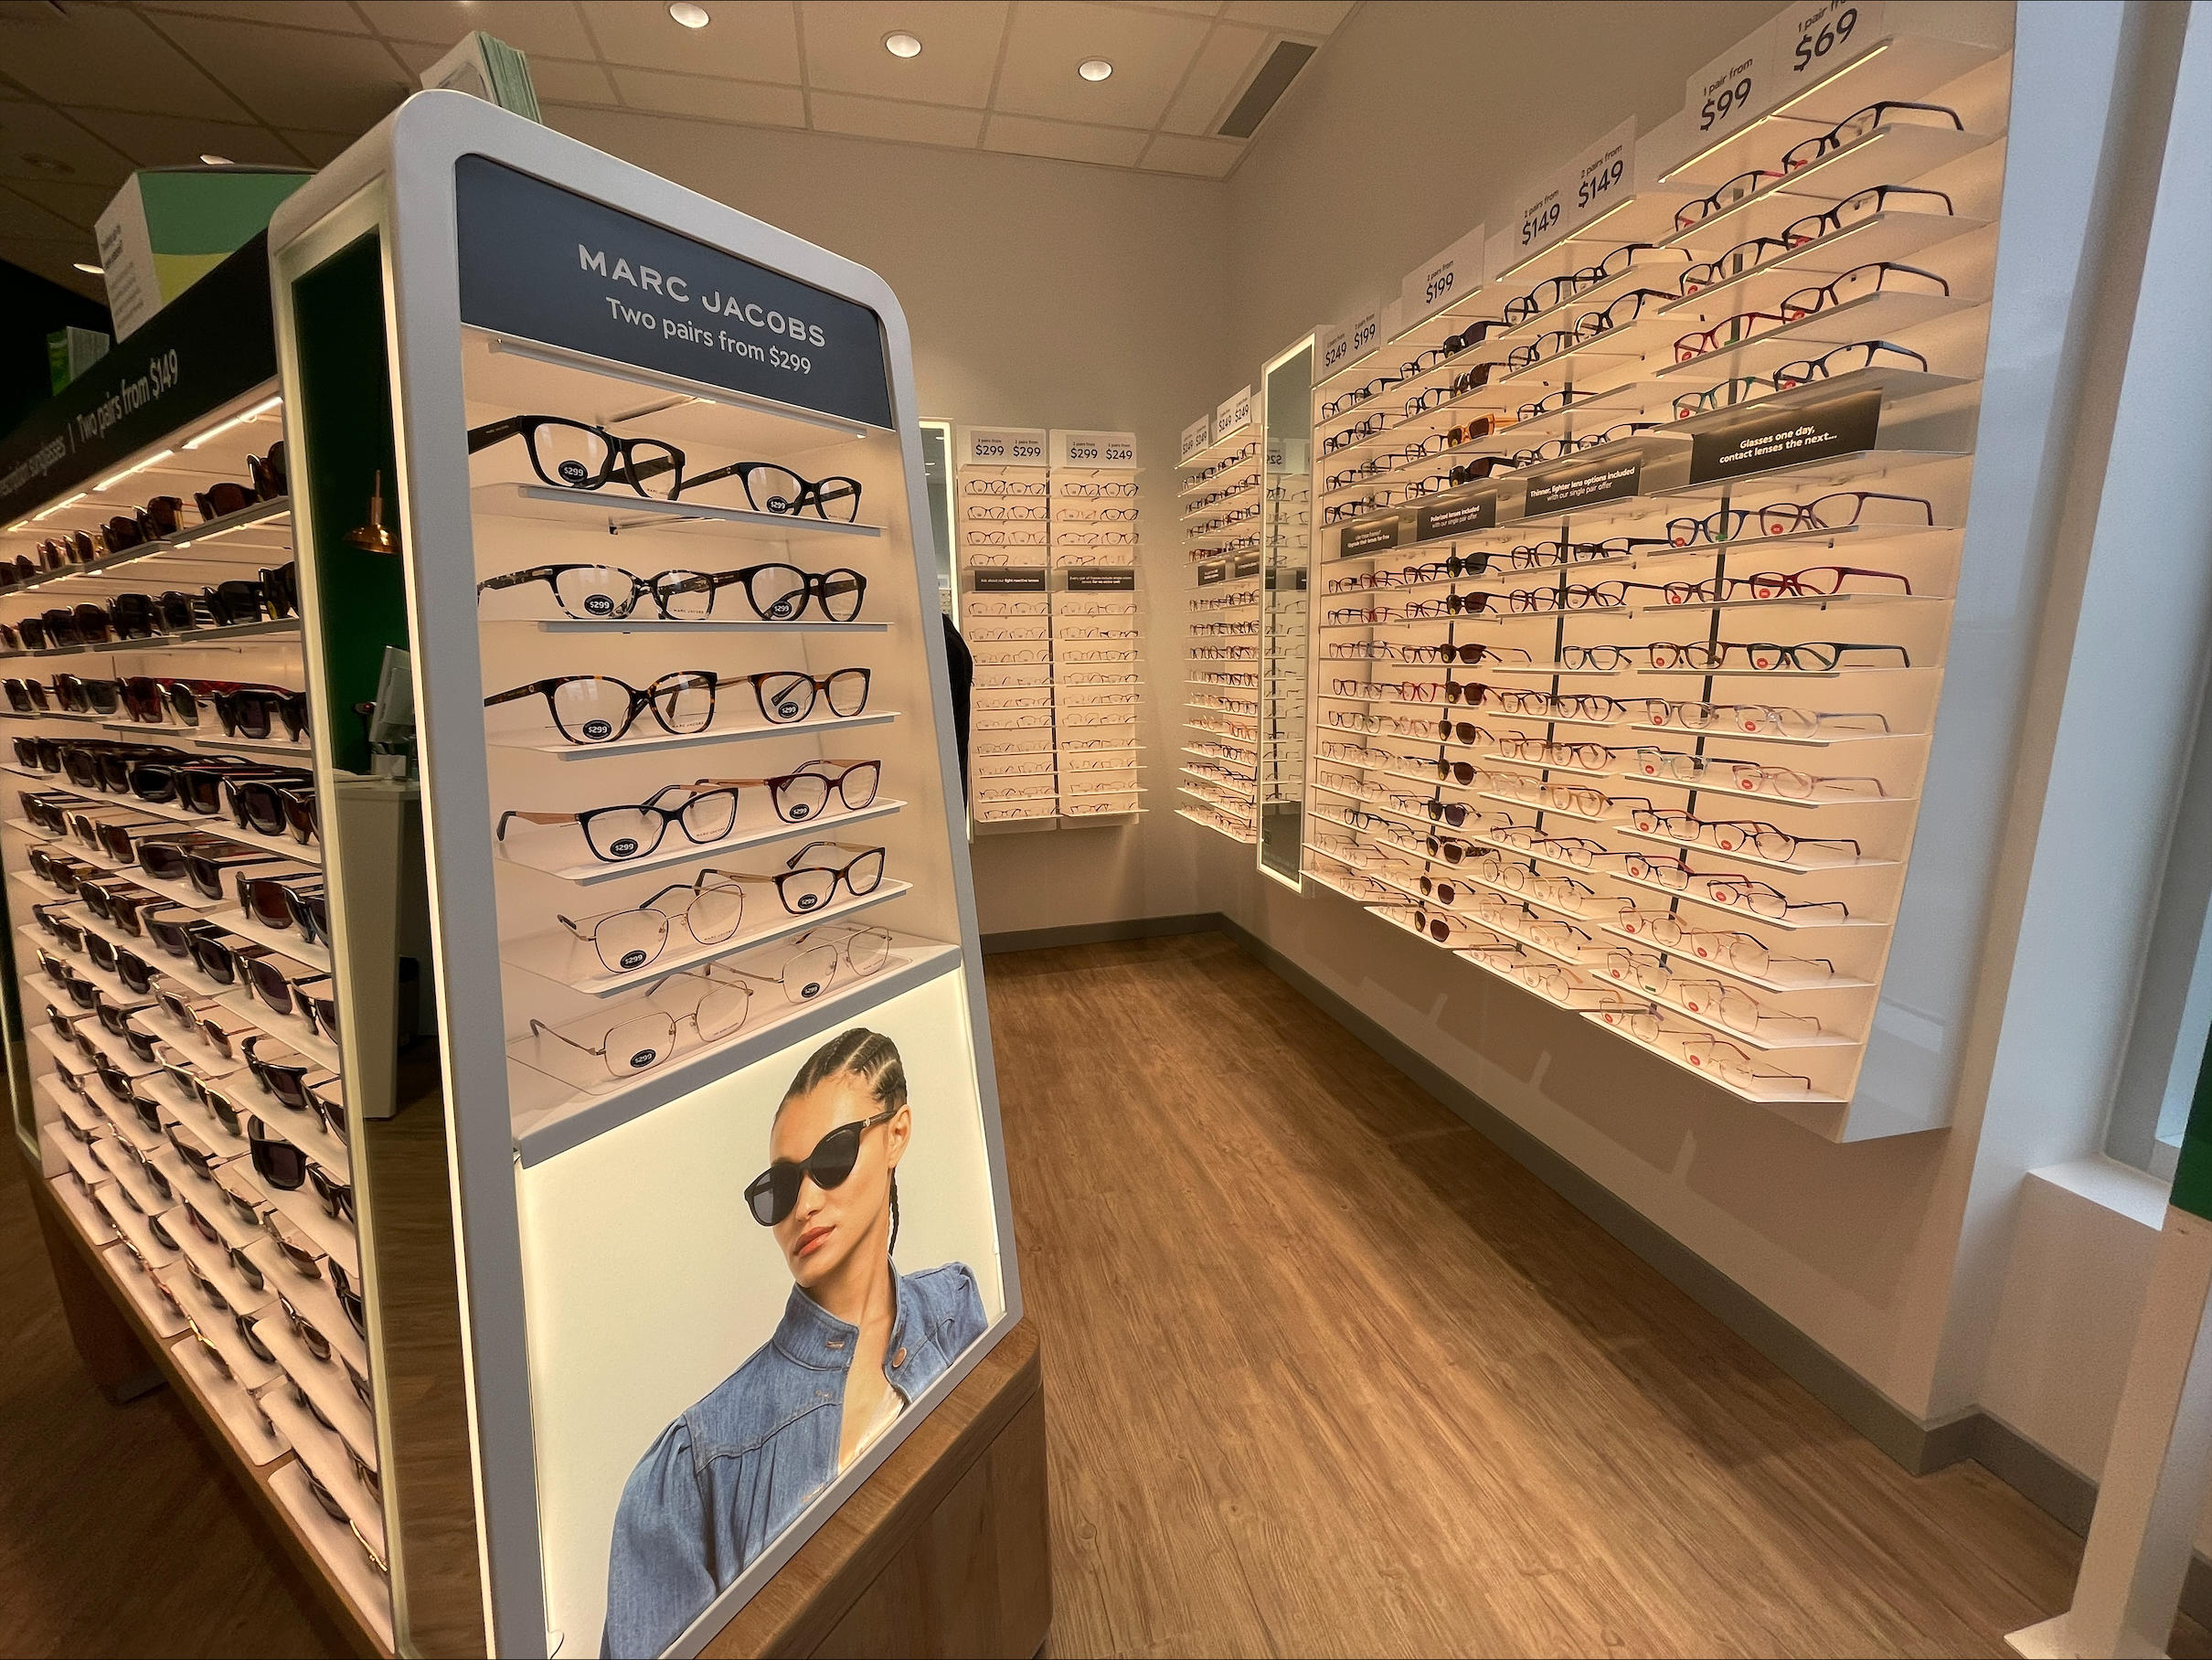 Images Specsavers Park Place Barrie